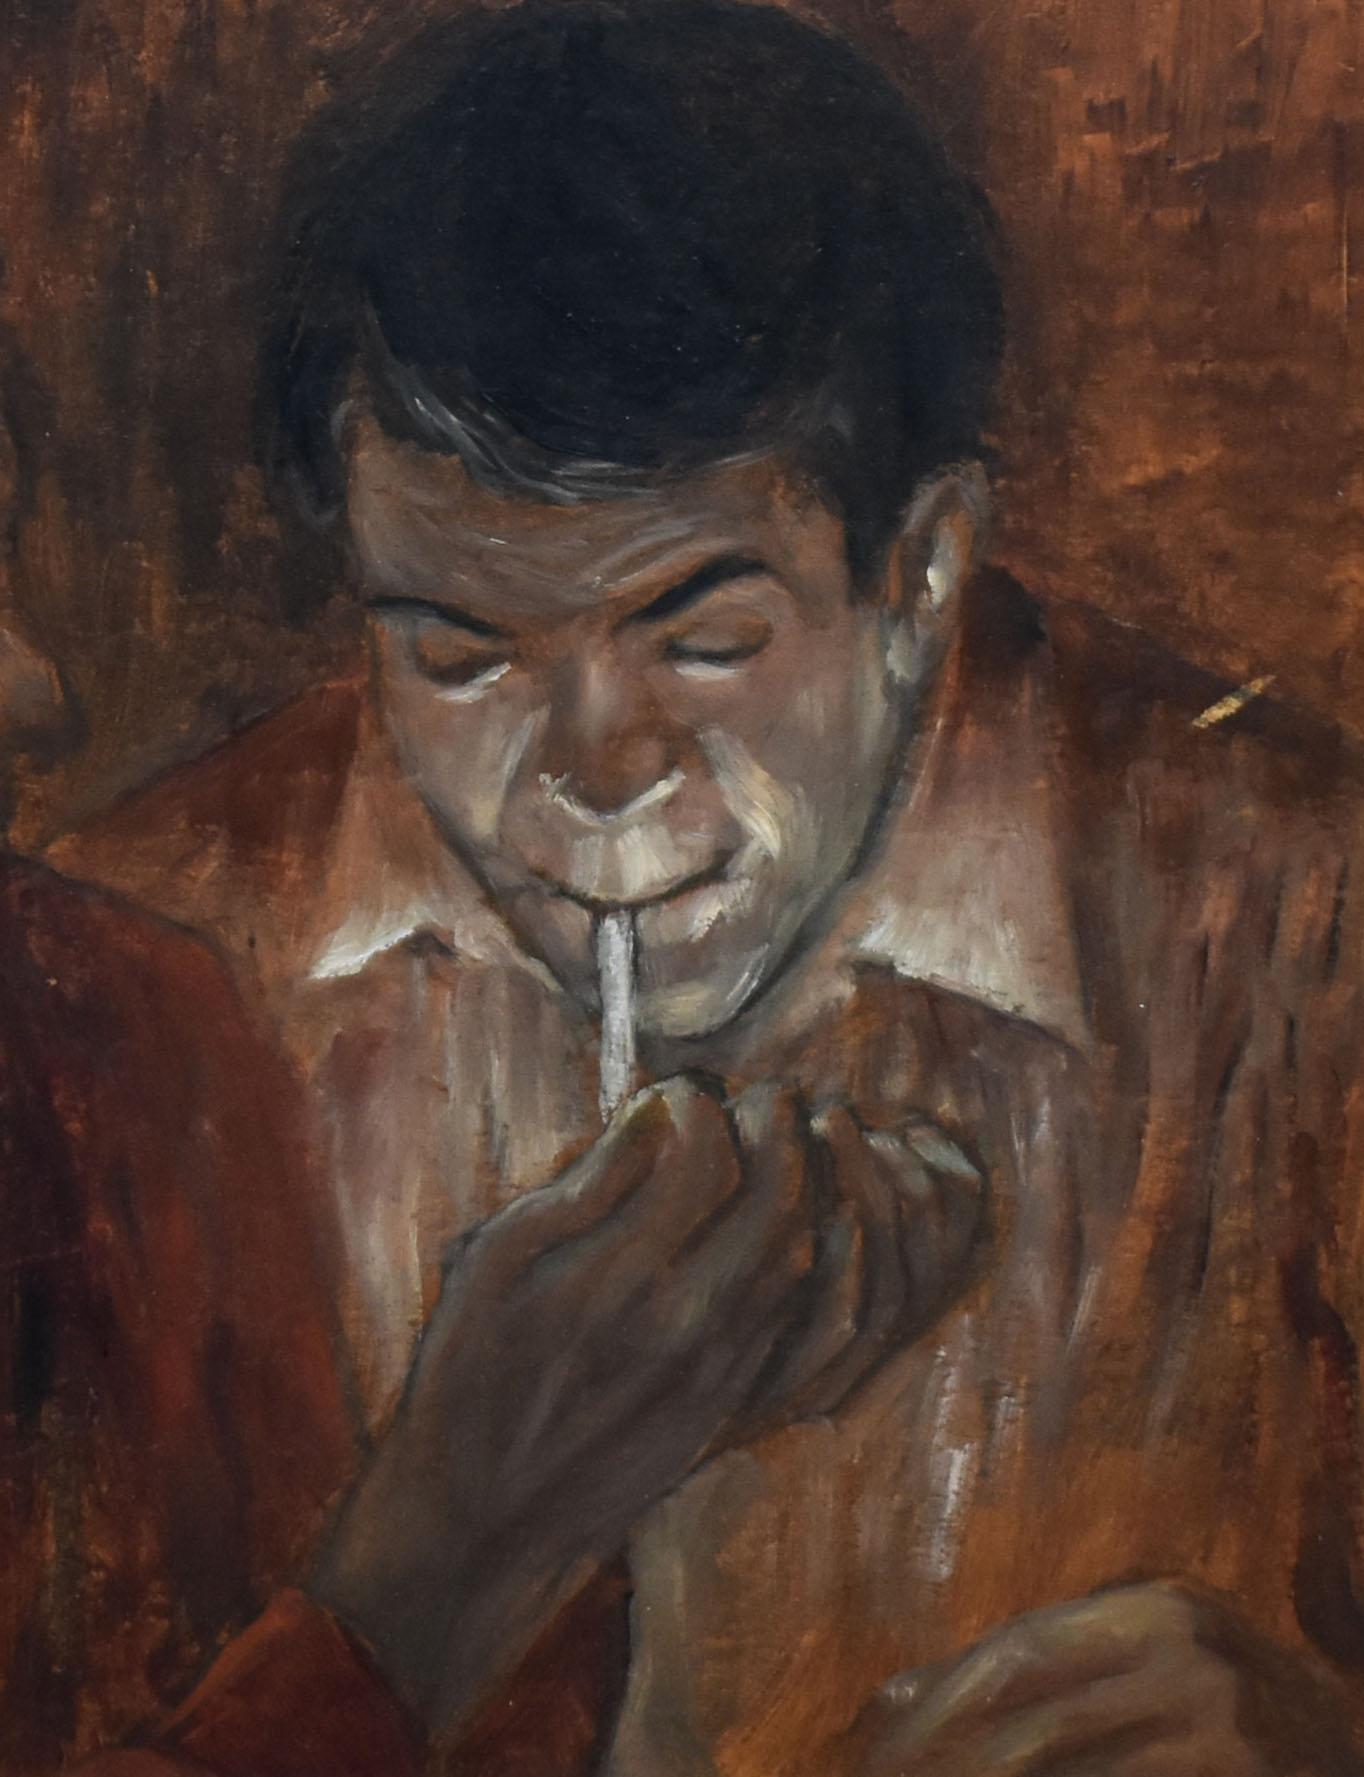 Modernist portrait painting of a man smoking by Carl Laughlin  (born 1926).   Oil on board, circa 1945.  Signed on back.  Displayed in a modernist frame.  Image size, 8